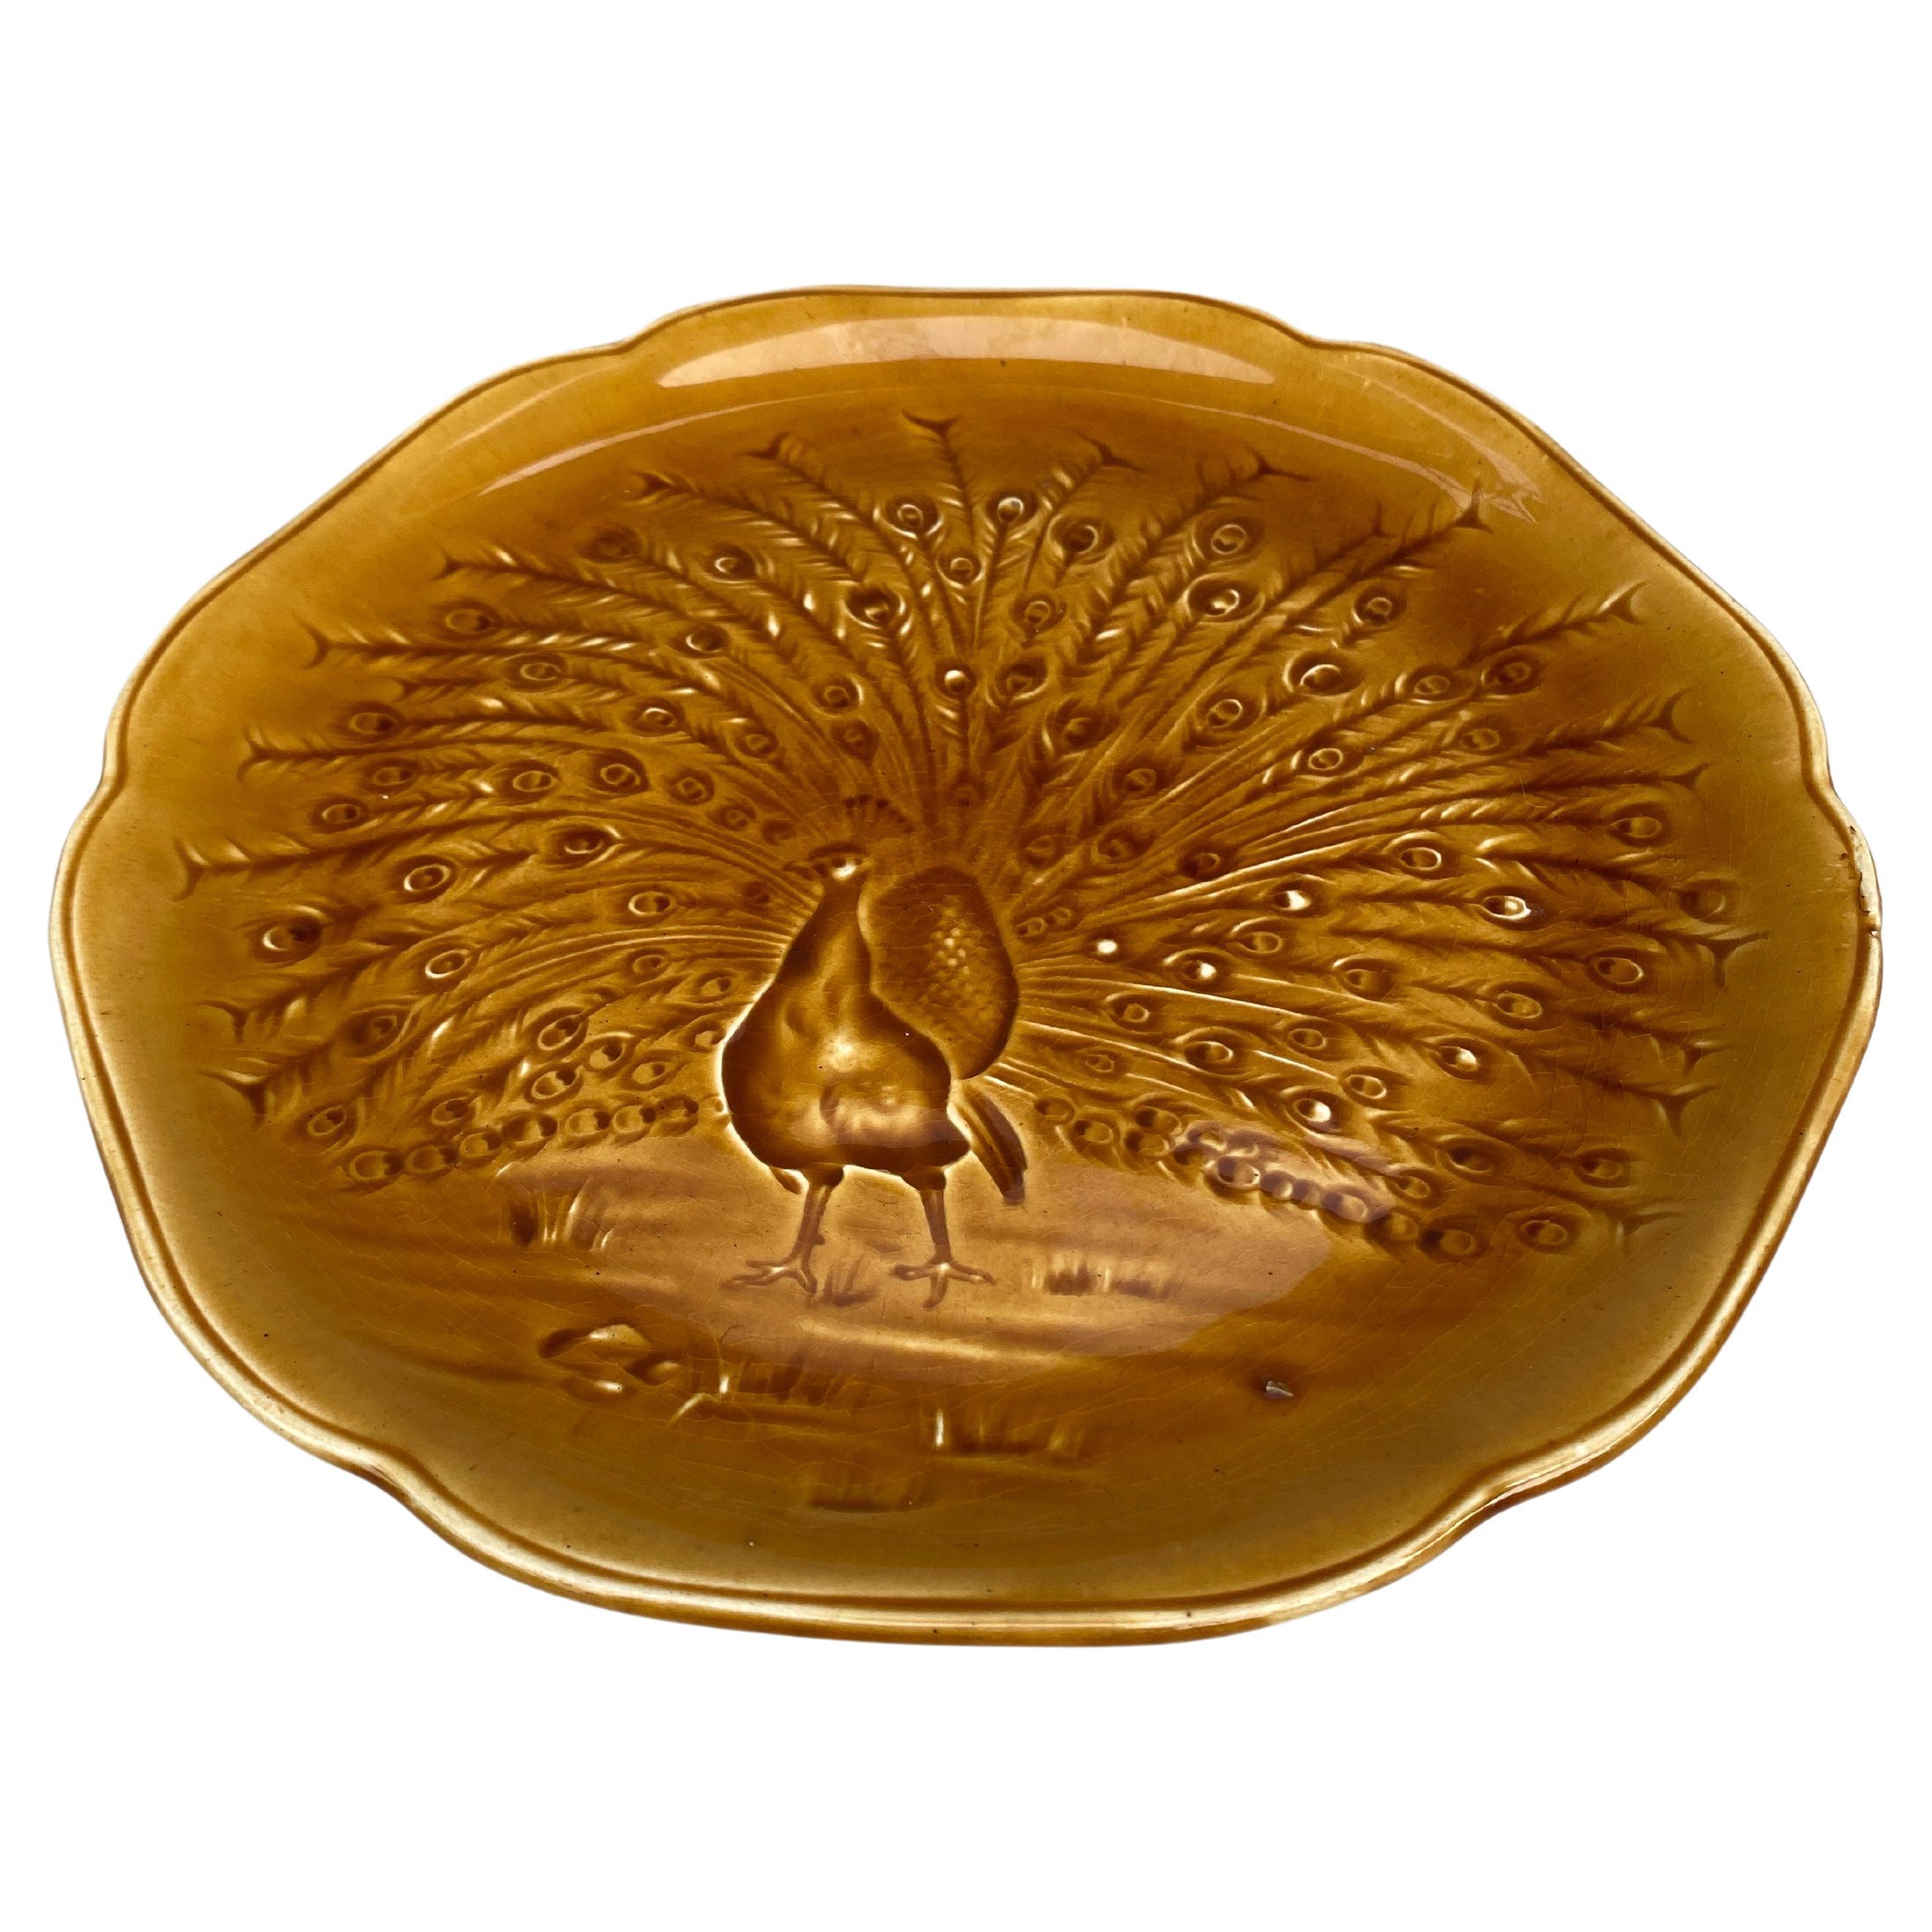 Goldenrold mustard Majolica plate with a peacock signed Hippolyte Boulenger Choisy le Roi, circa 1890.
The manufacture of Choisy le Roi was one of the most important manufacture at the end of 19th century, they produced very high quality ceramics of